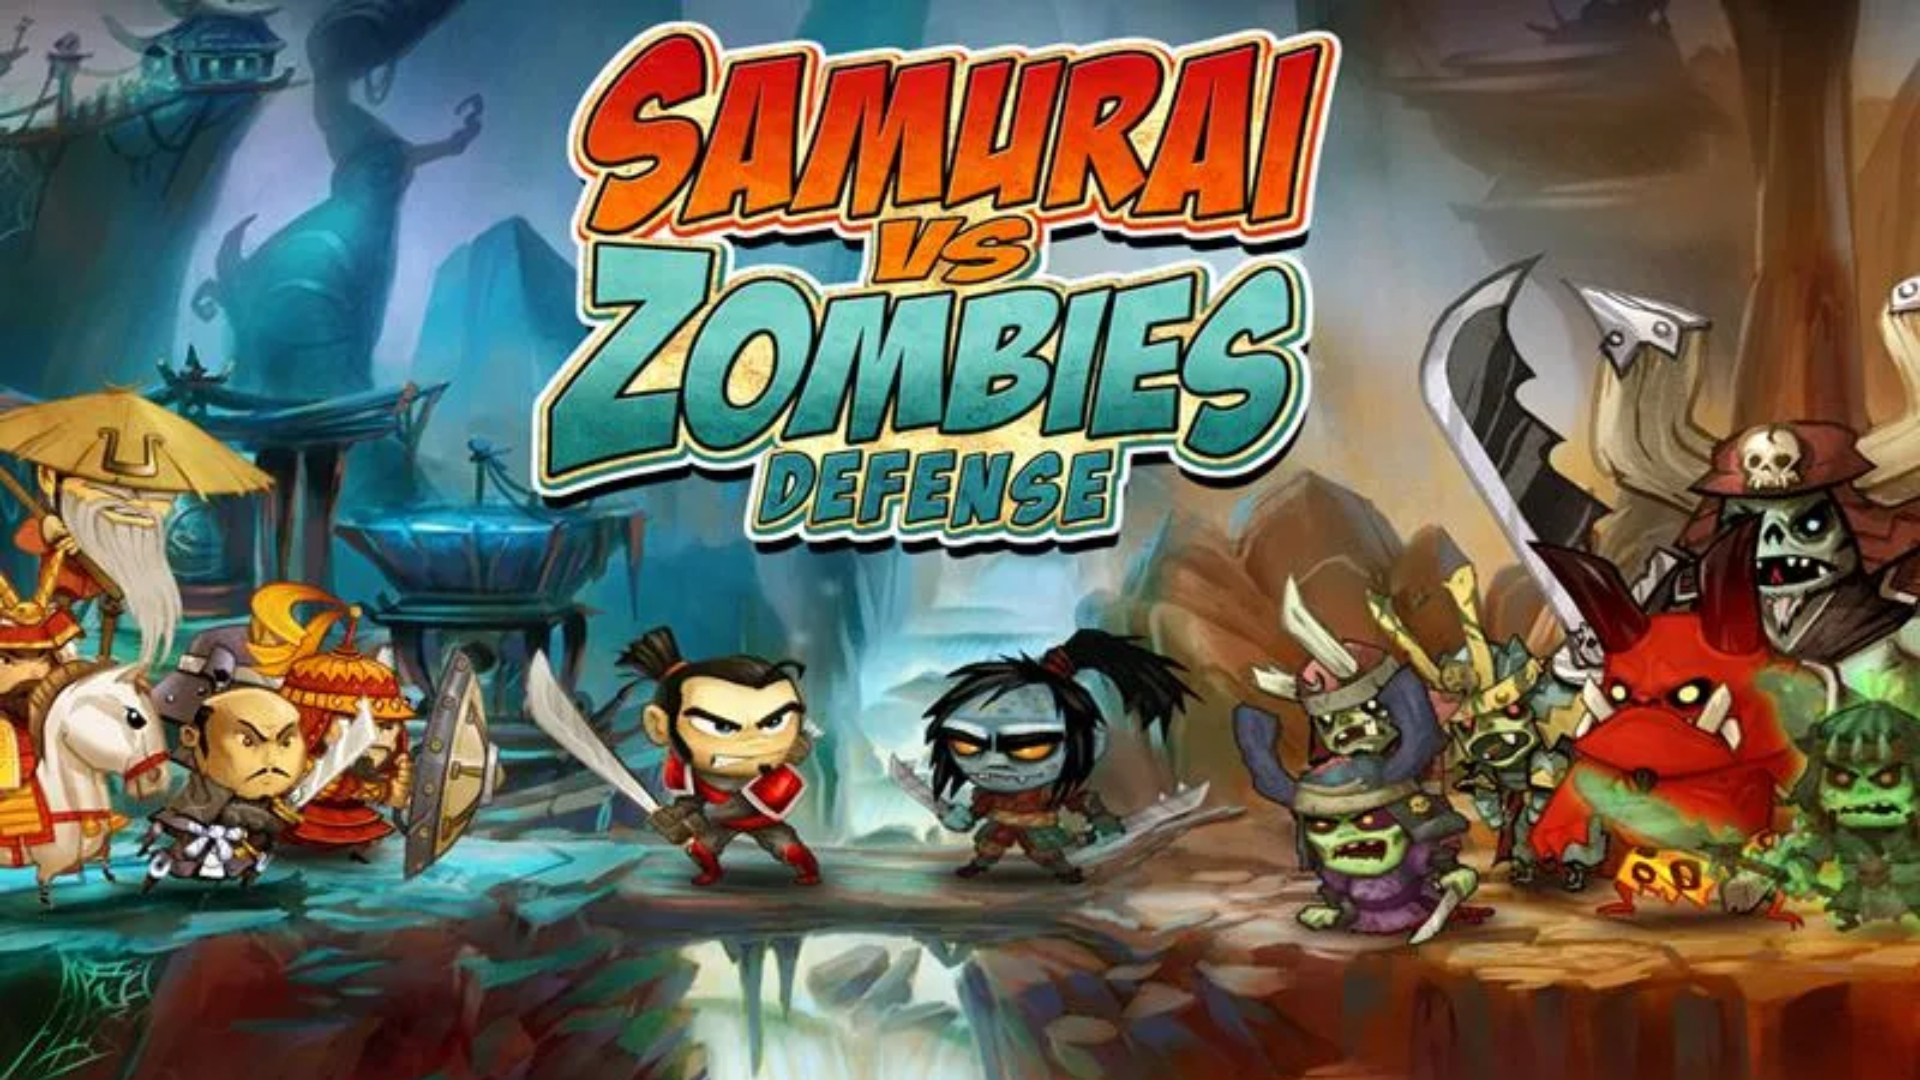 Best samurai games: Samurai vs Zombies Defense. Image shows the game's logo beside a group of zombies and a group of Samurai preparing to fight.